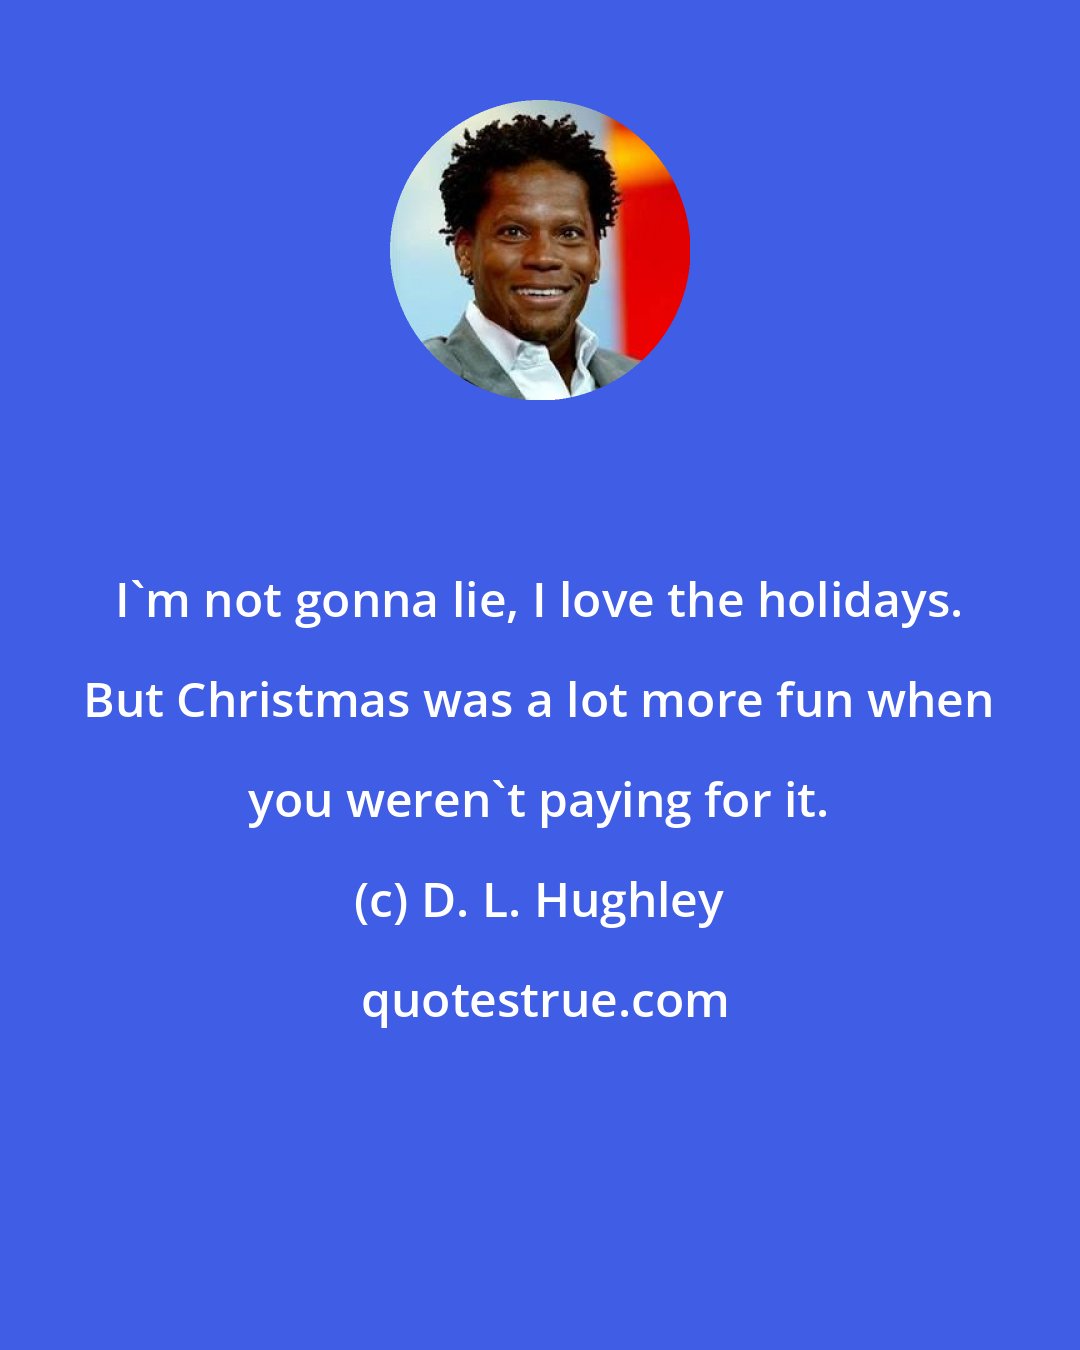 D. L. Hughley: I'm not gonna lie, I love the holidays. But Christmas was a lot more fun when you weren't paying for it.